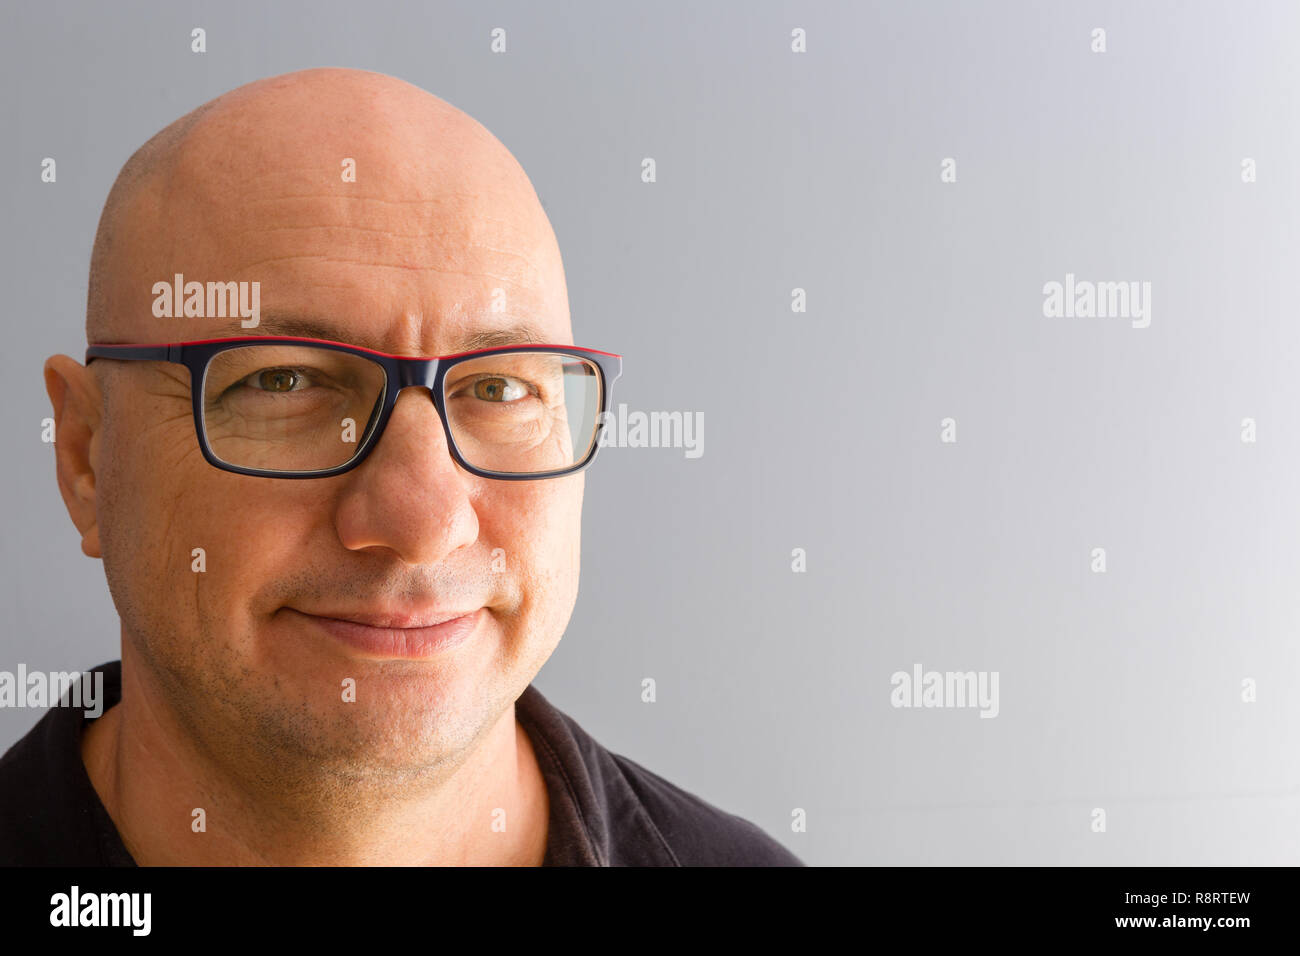 Close-up bust front portrait of smiling bold middle-aged man in black-rimmed glasses and black shirt, looking at camera with a friendly smile. Plain g Stock Photo